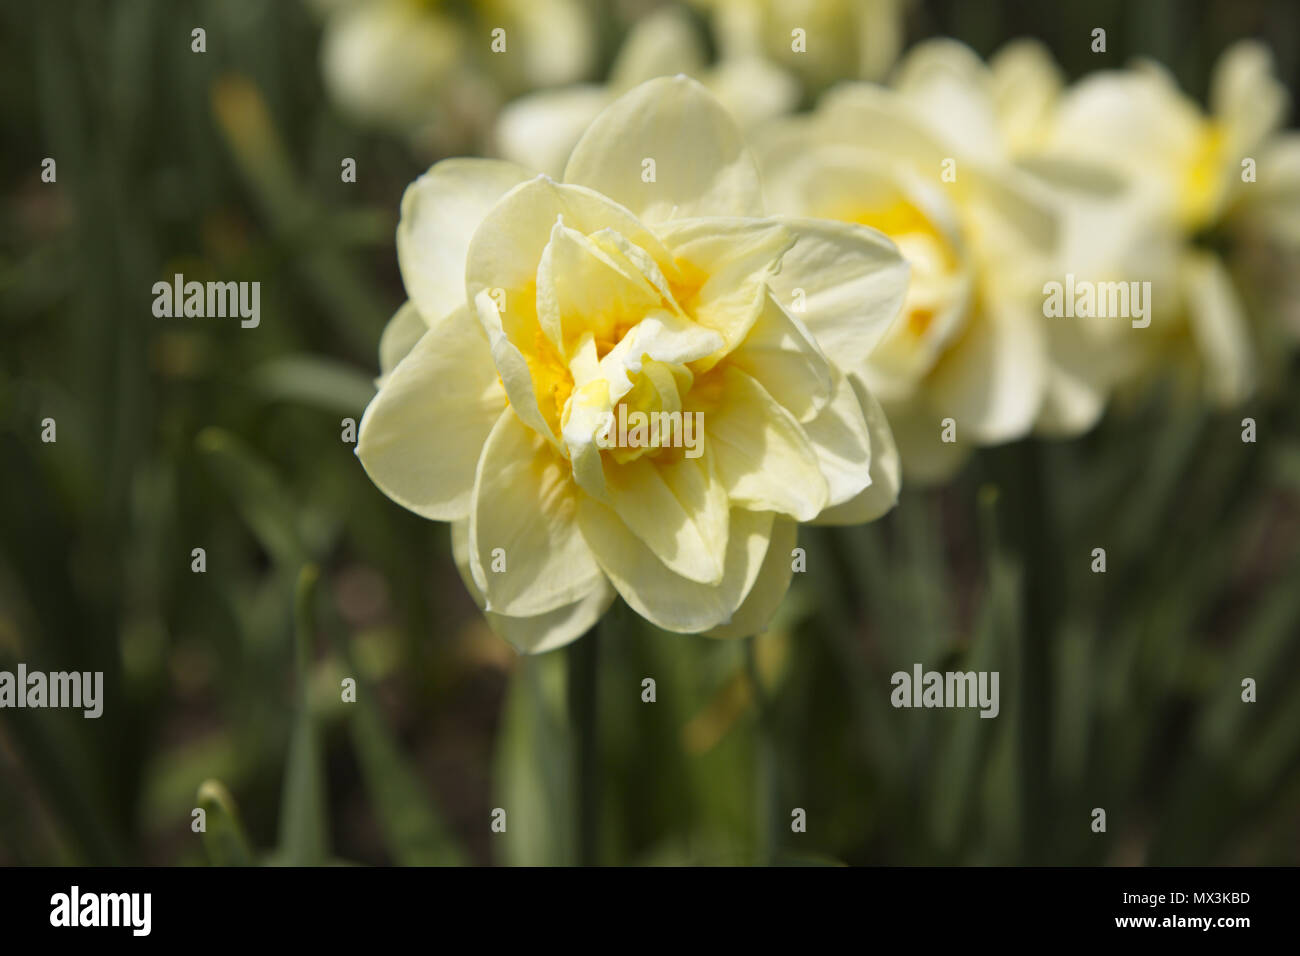 Selective focus on initial daffodil in series creates a leadership and first in series metaphor for fresh beginnings. Stock Photo